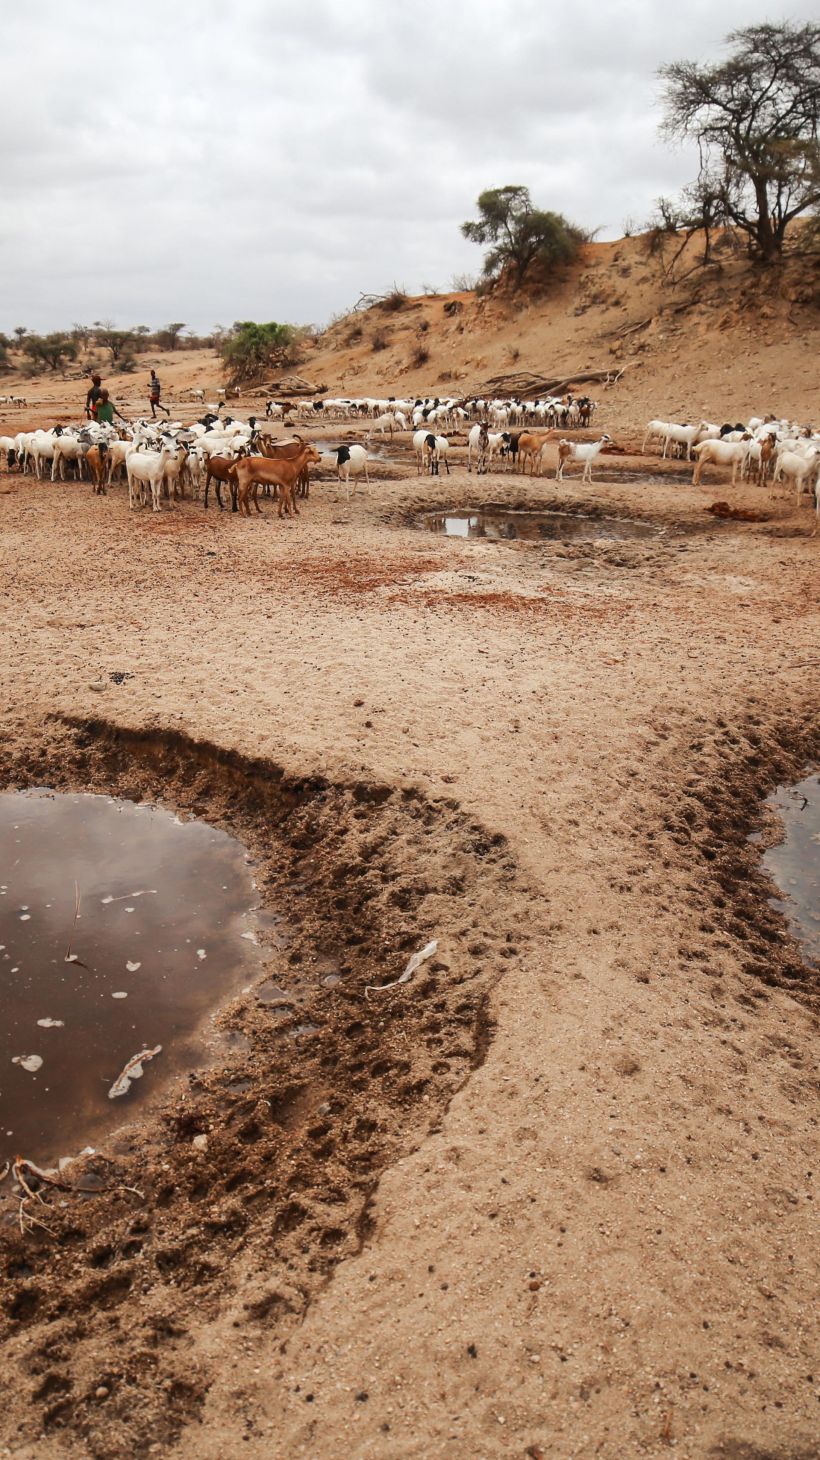 Two small watering holes are drying up as animals and herders wander around